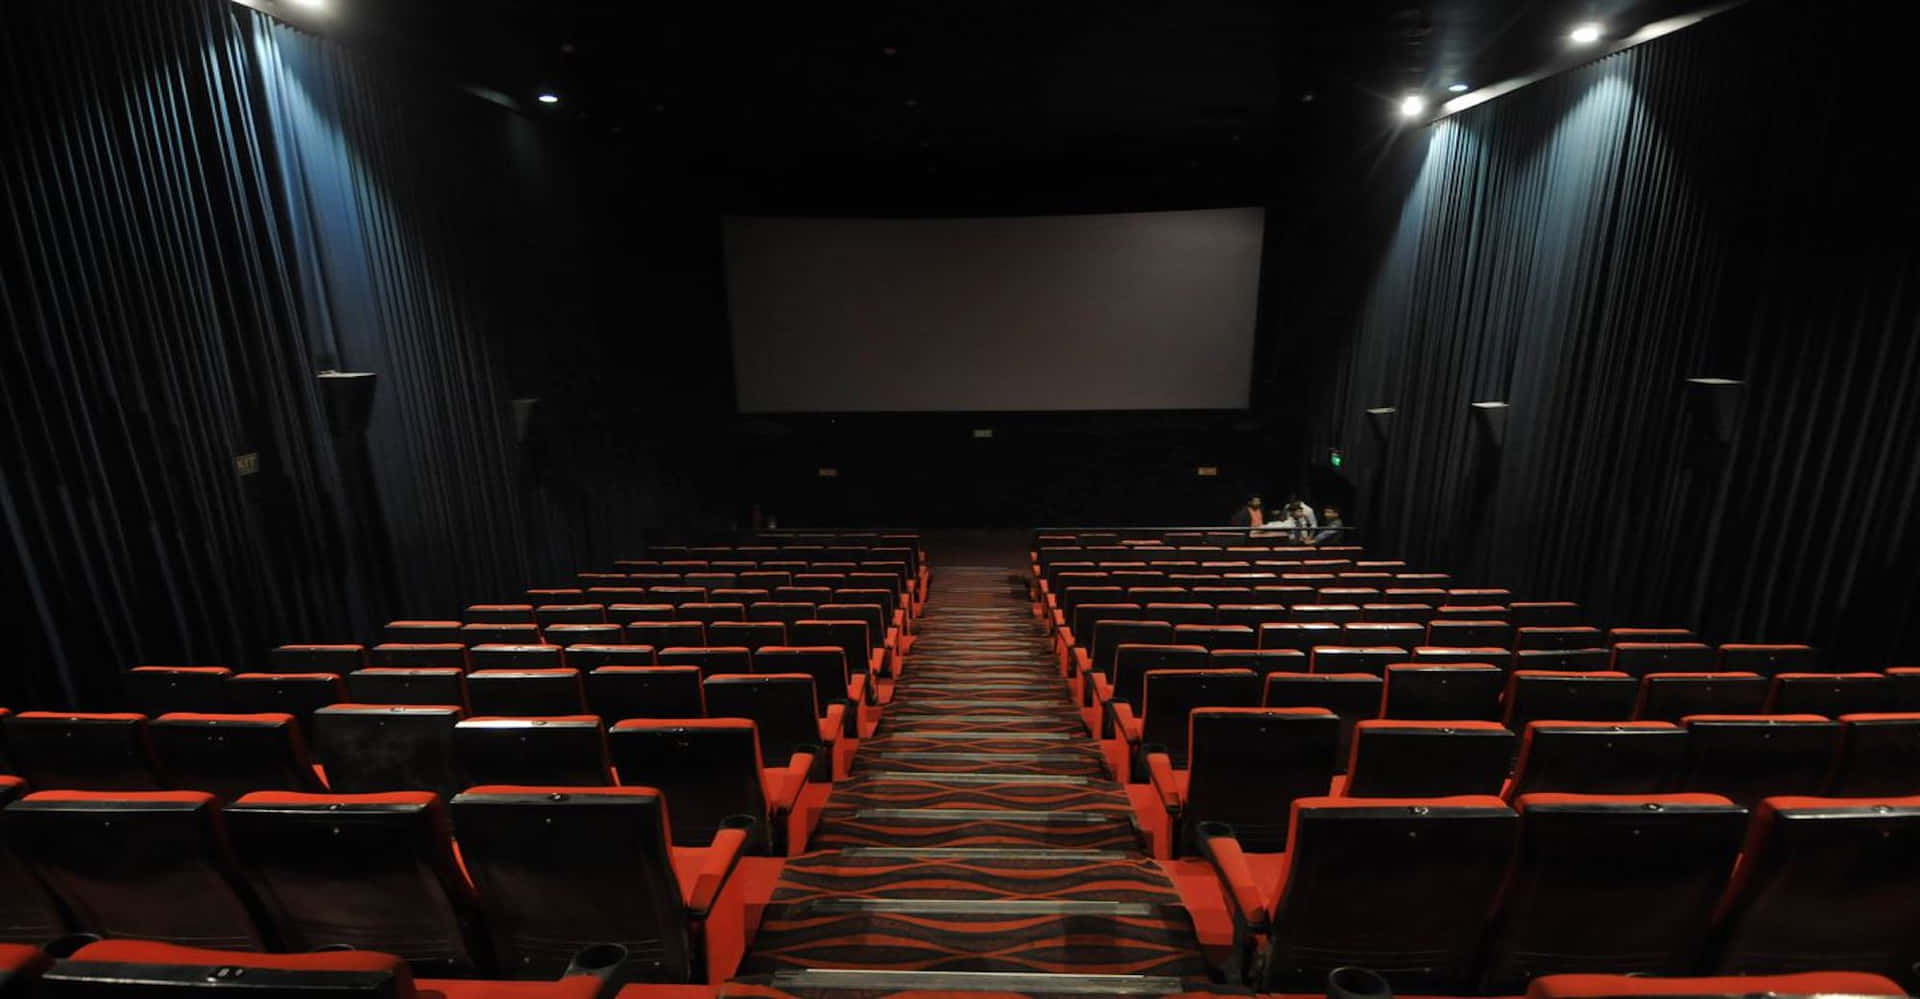 A Theater With Rows Of Seats And A Screen Wallpaper